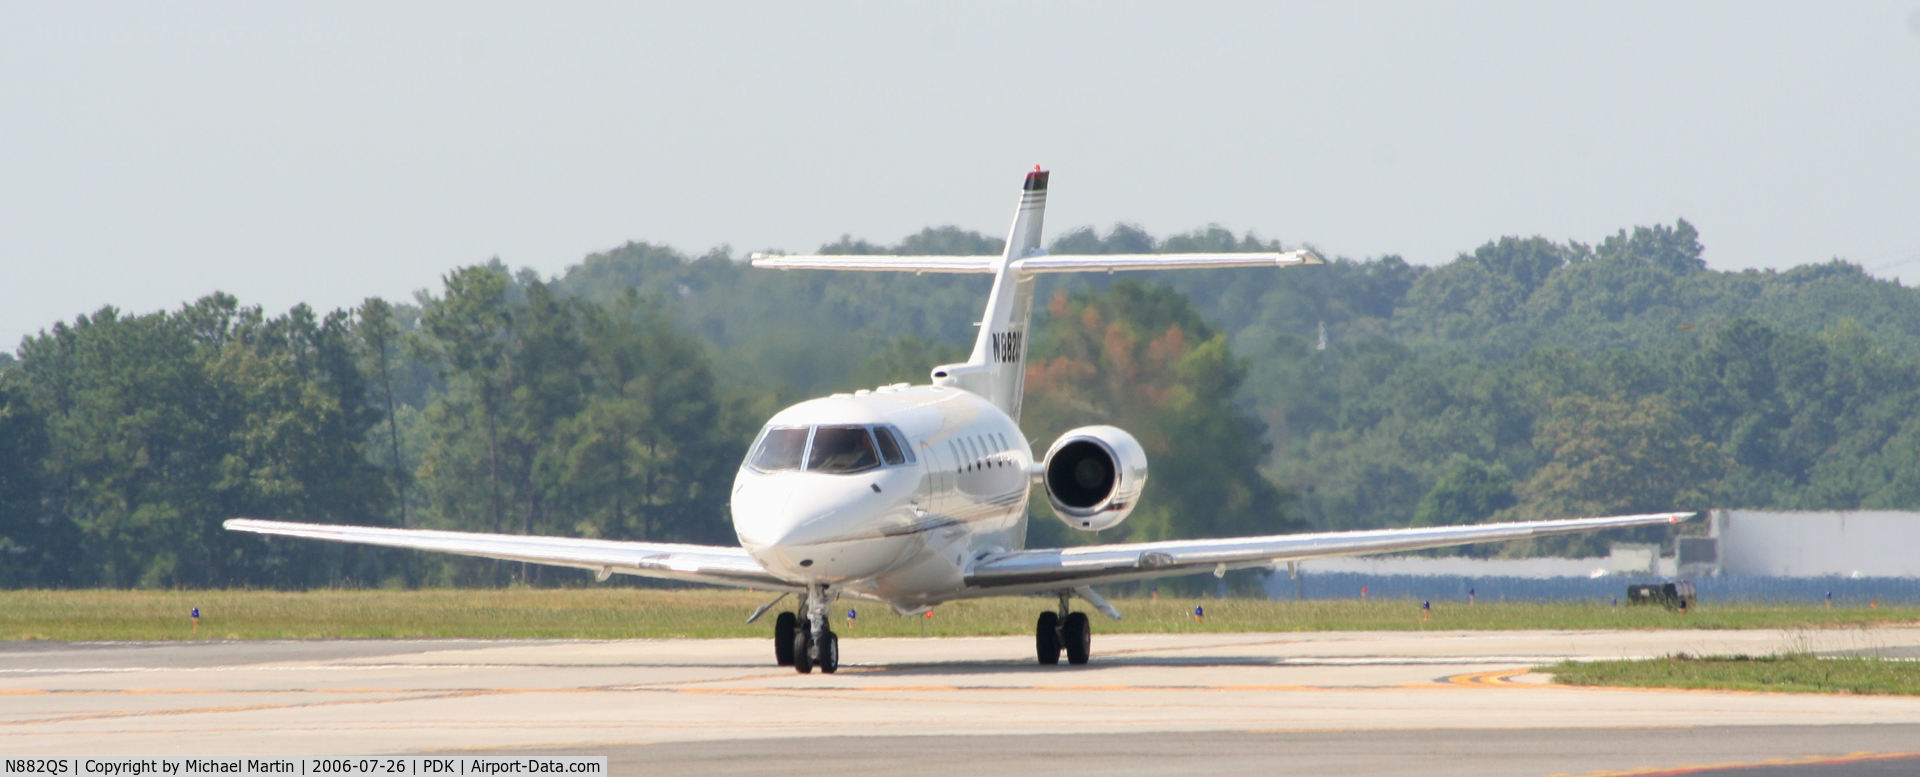 N882QS, 2000 Raytheon Hawker 800XP C/N 258482, Taxing to Signature Air